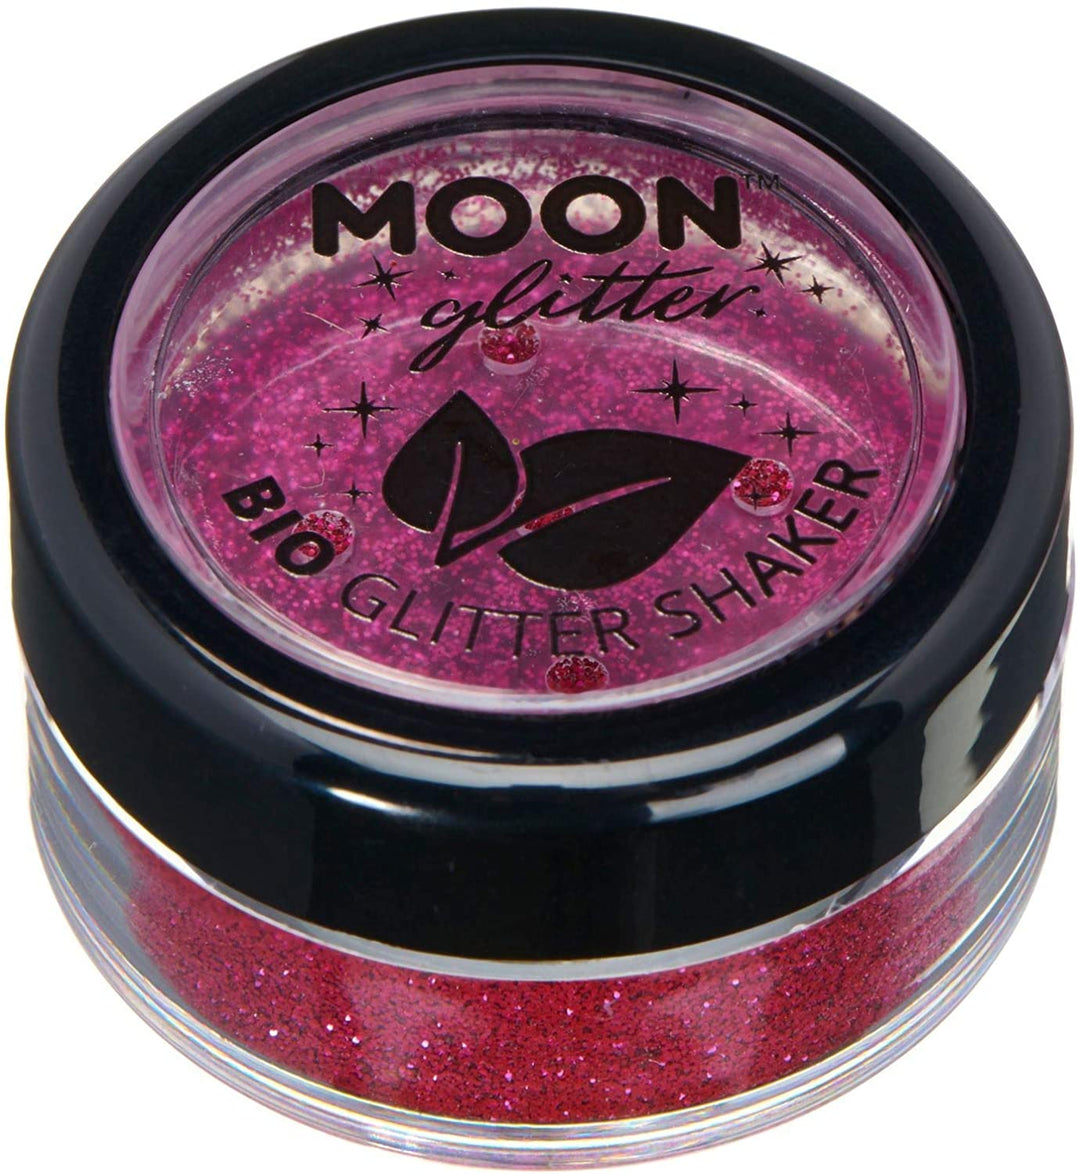 Biodegradable Eco Glitter Shakers by Moon Glitter Dark Rose Cosmetic Bio Festival Makeup Glitter for Face, Body, Nails, Hair, Lips